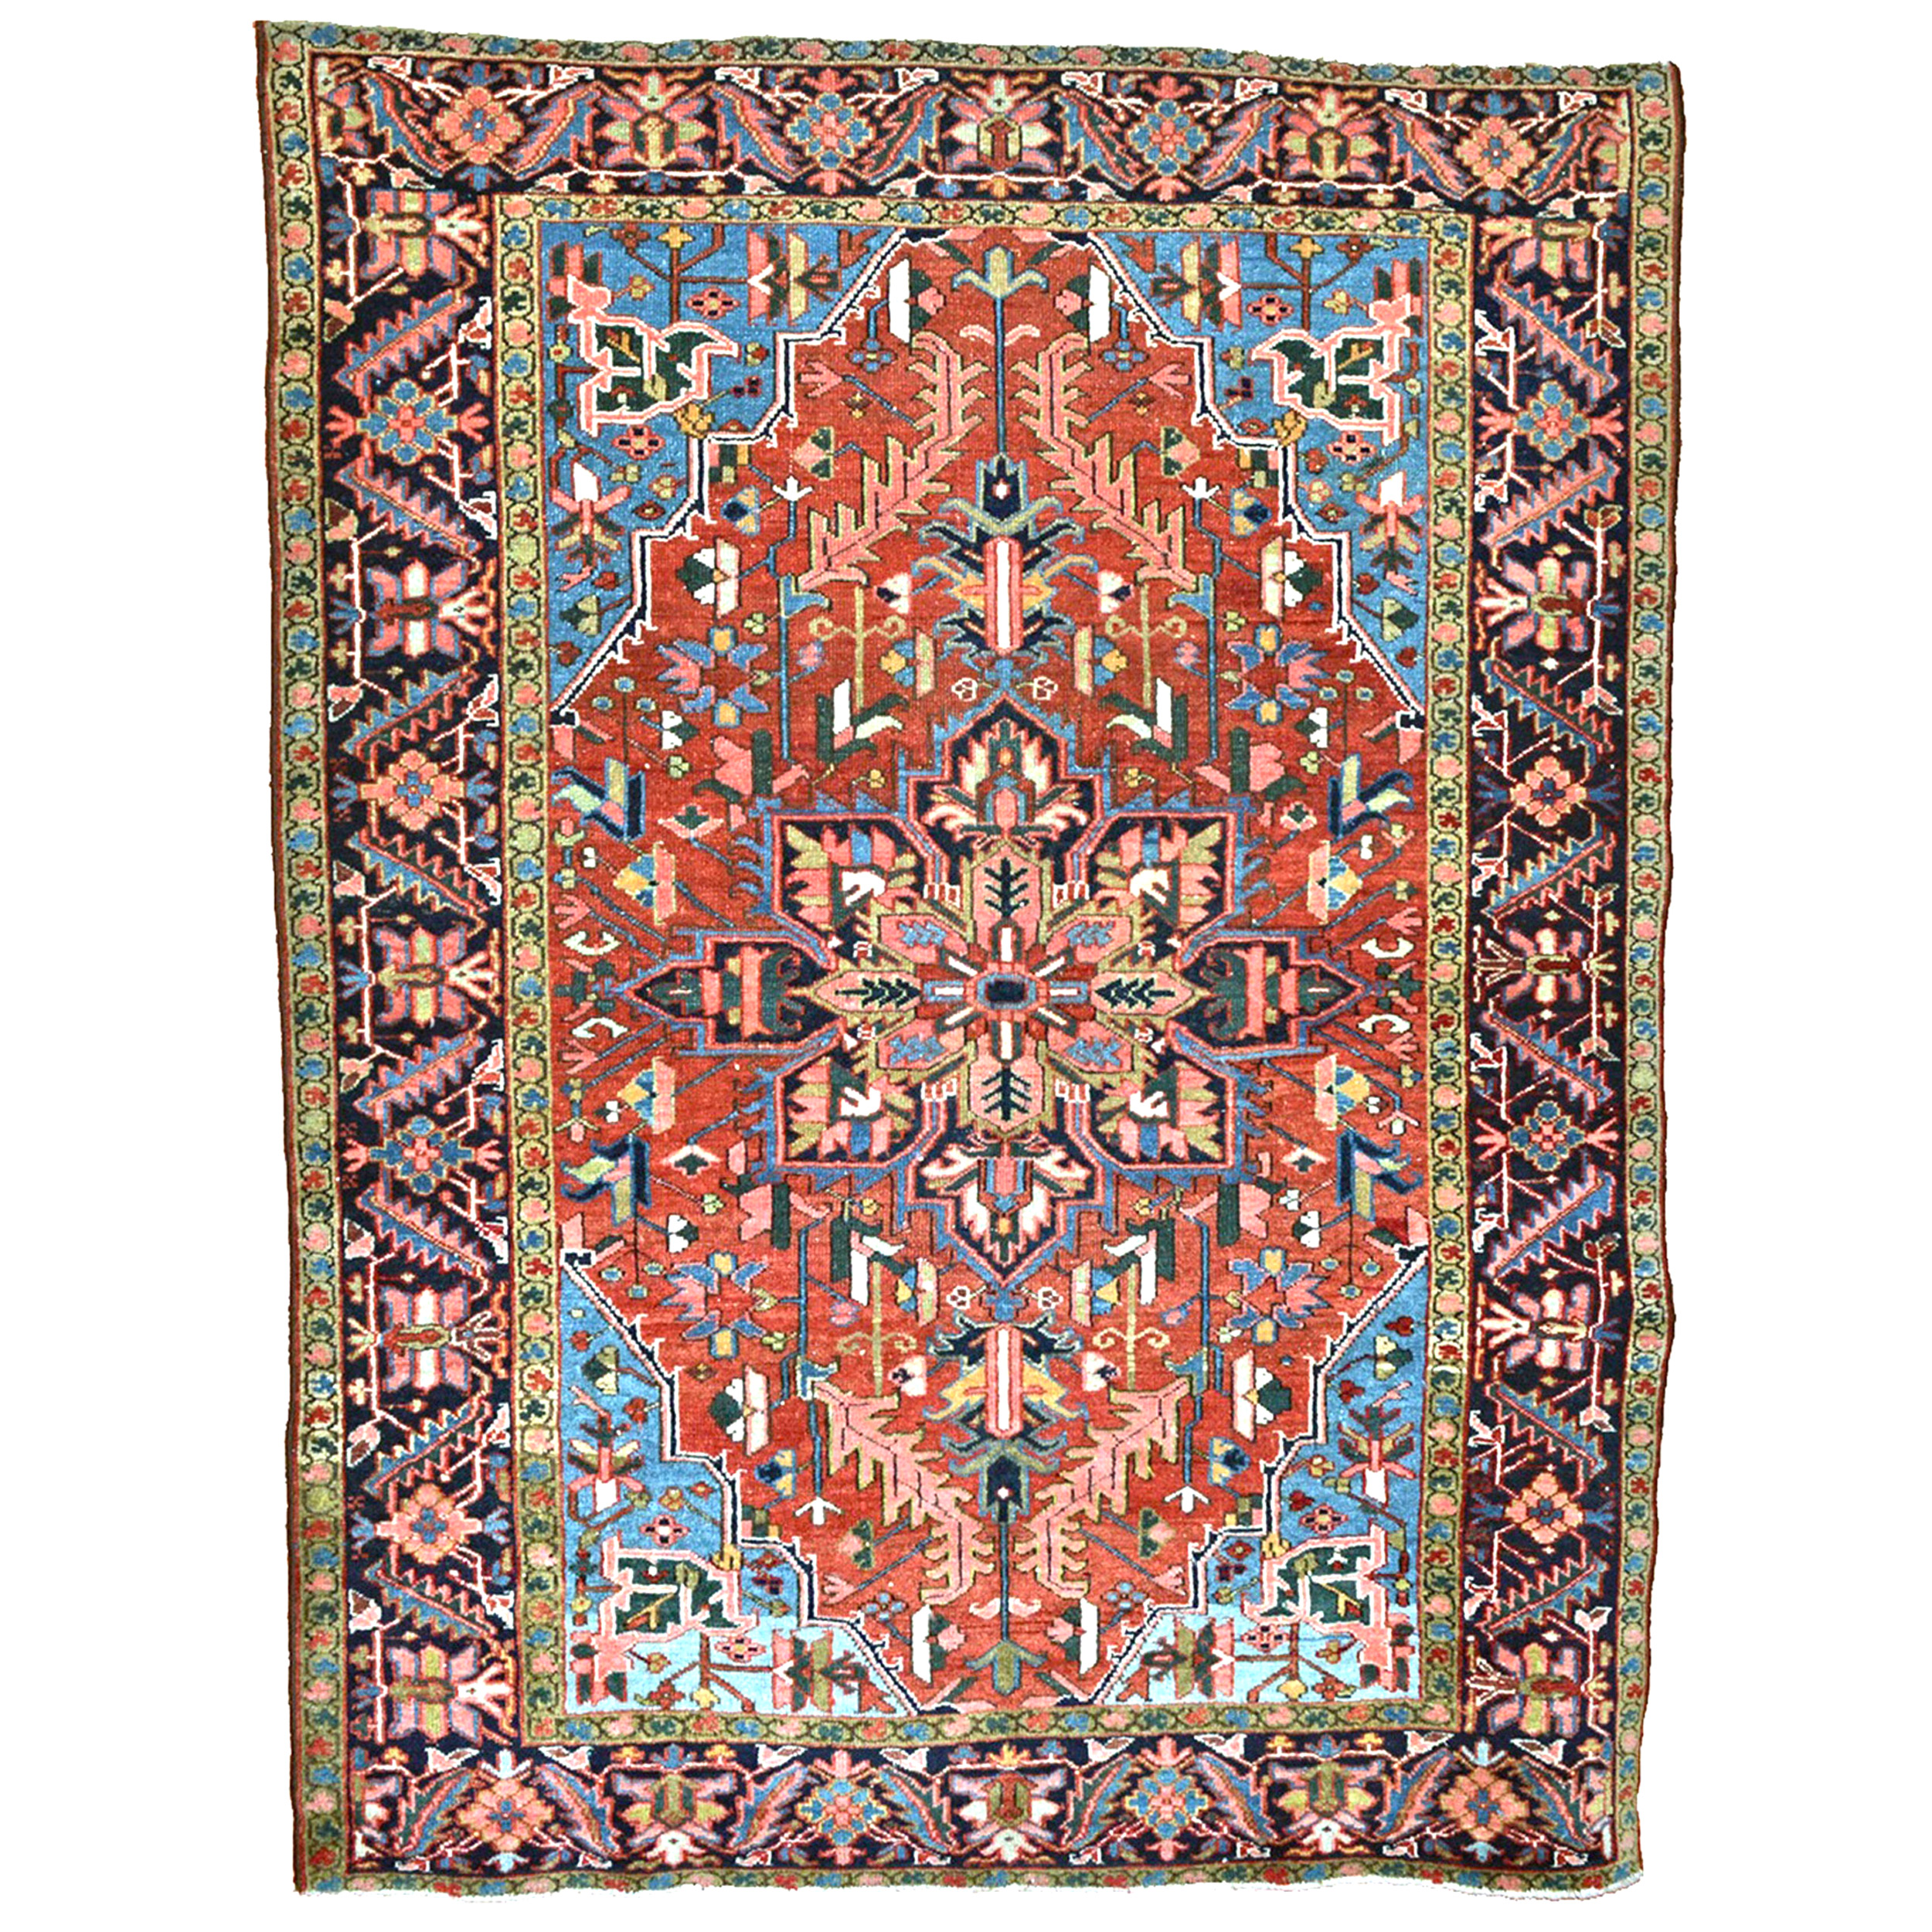 Antique Karaja rug with a navy blue medallion on a terra cotta color field, Heriz area, northwest Persia, circa 1920 - Douglas Stock Gallery, antique Persian rugs, South Natick, Boston,MA area, antique rugs New England